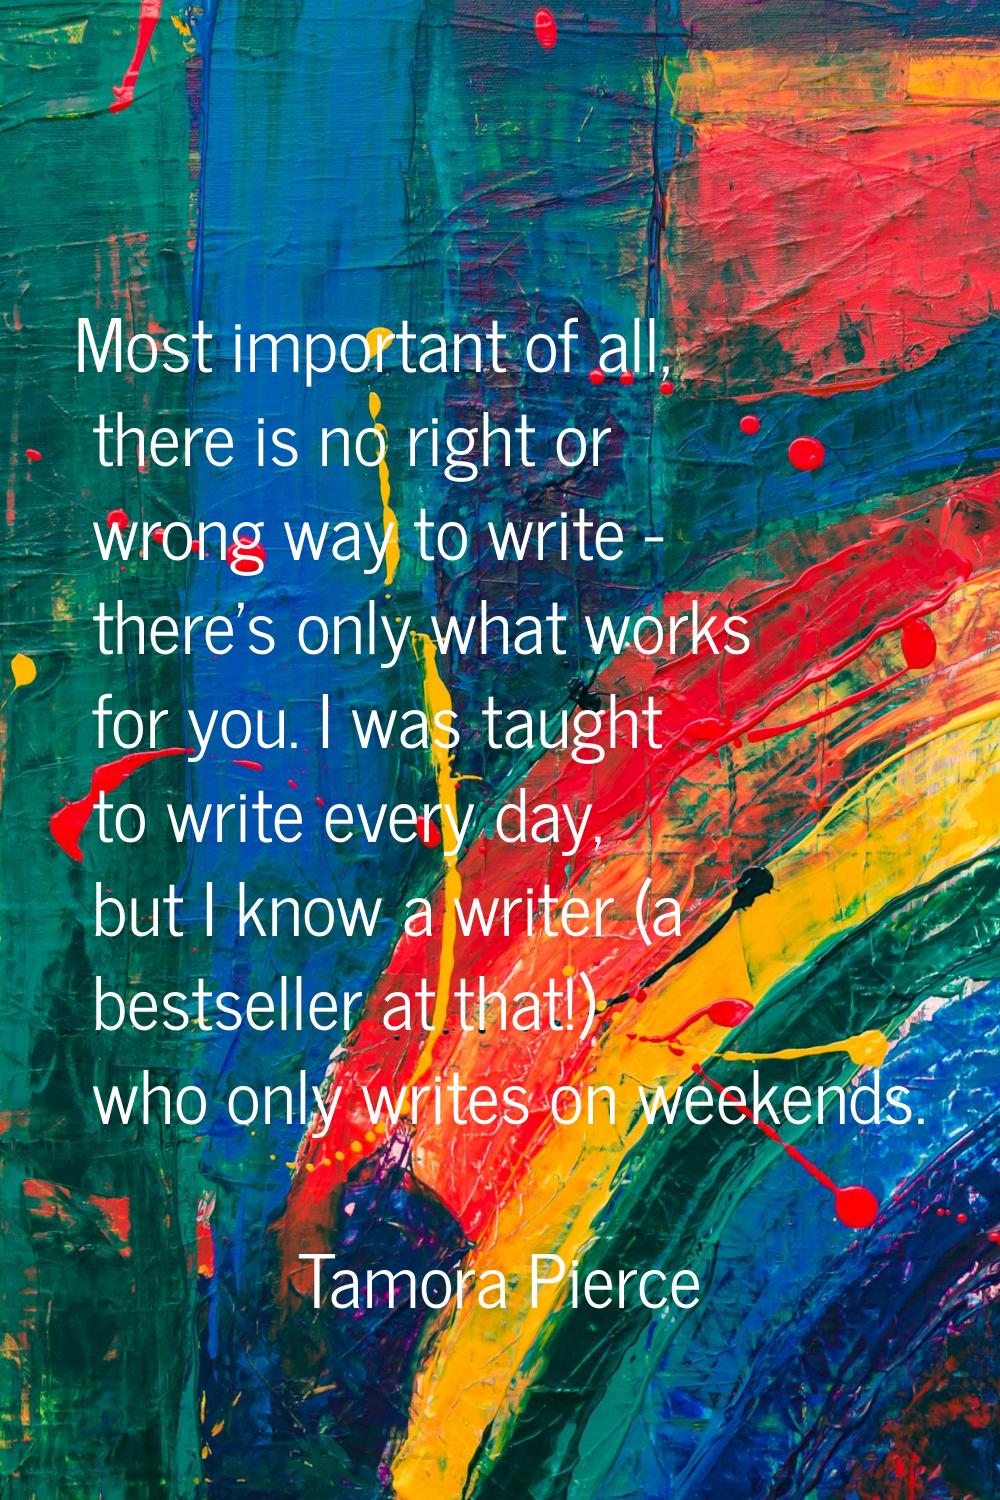 Most important of all, there is no right or wrong way to write - there's only what works for you. I